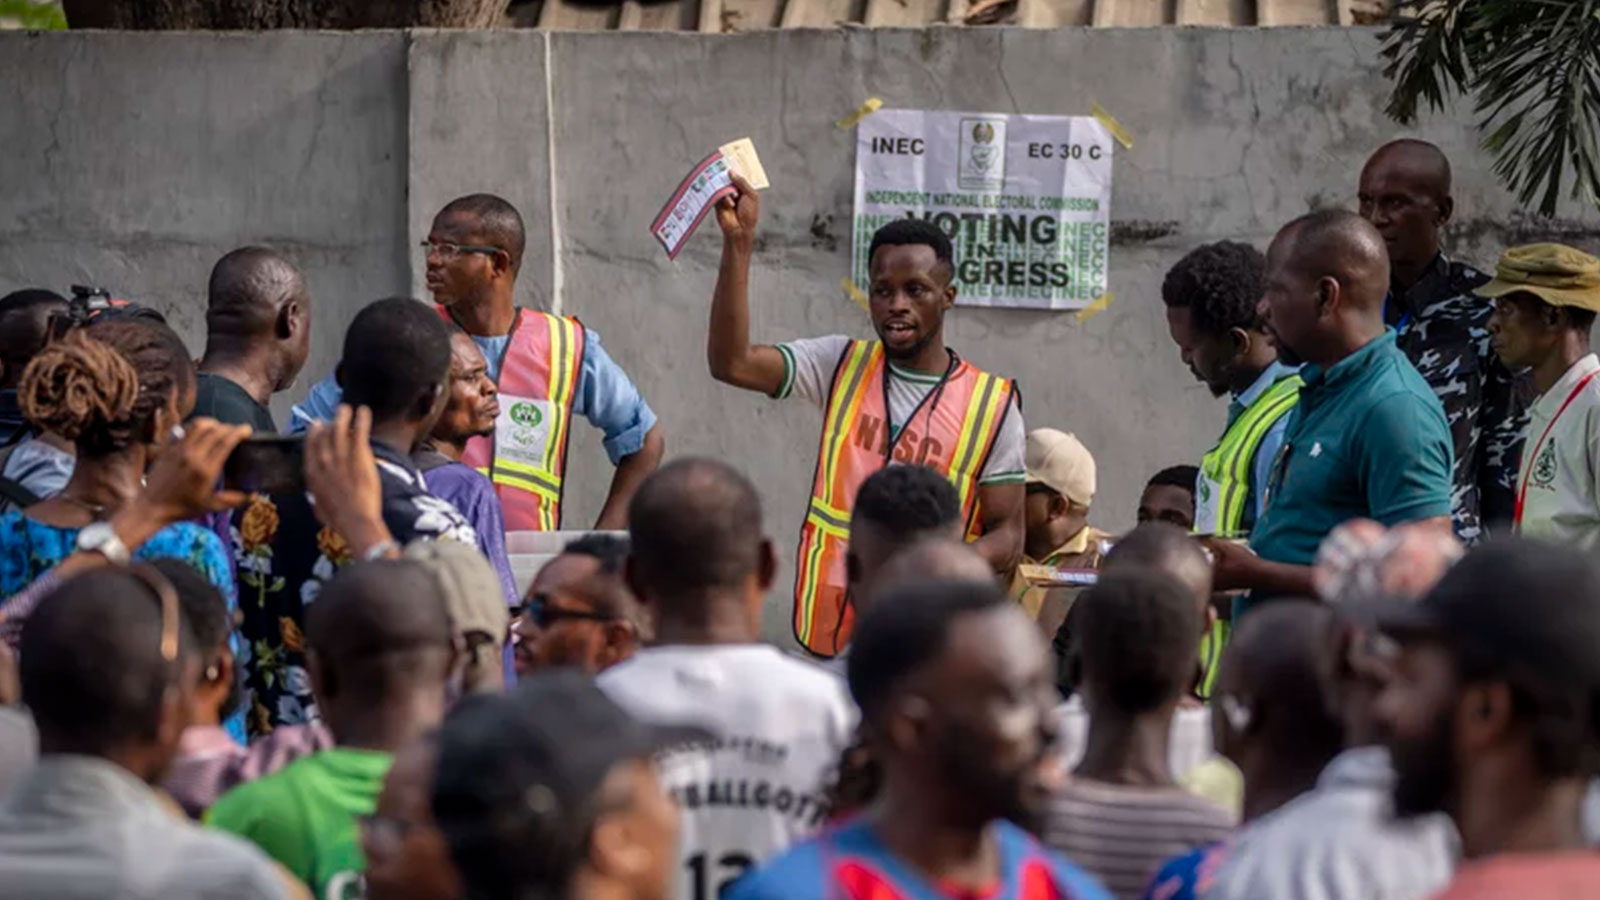 An electoral officer holds up votes as they are counted at a polling station in Lagos, Nigeria.